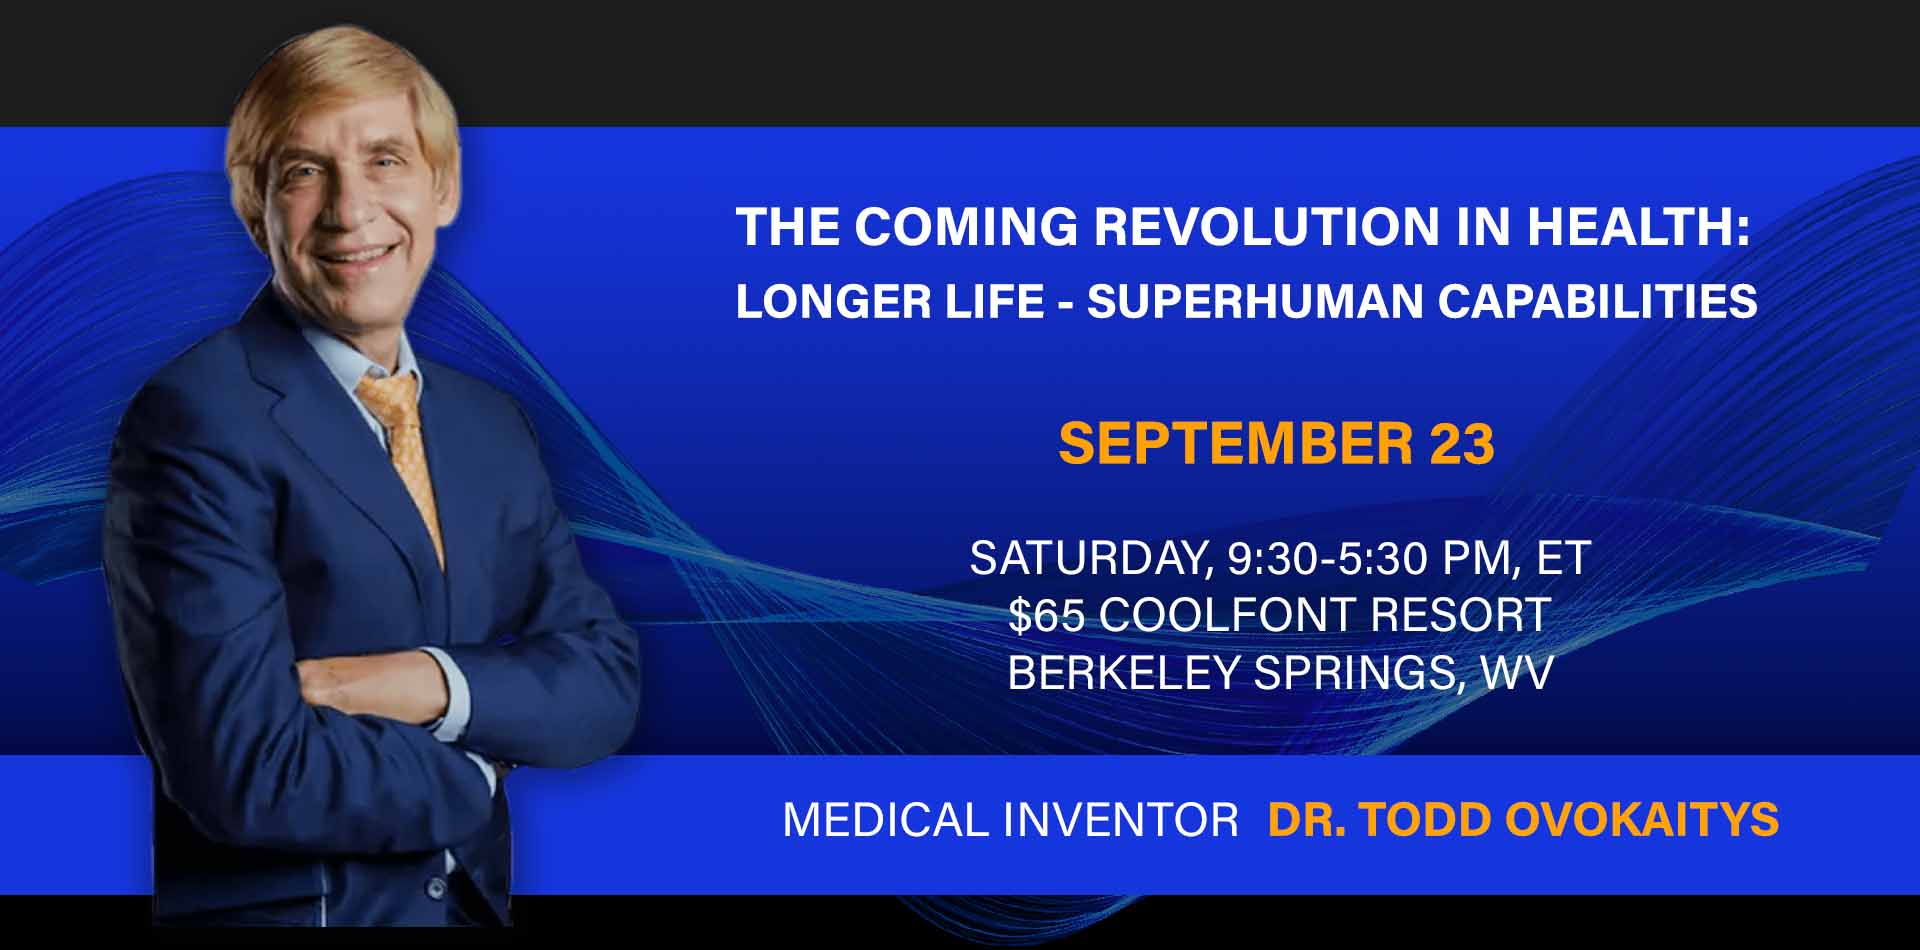 Dr. Todd Ovokaitys, the coming revolution in health, TransitionTALKS